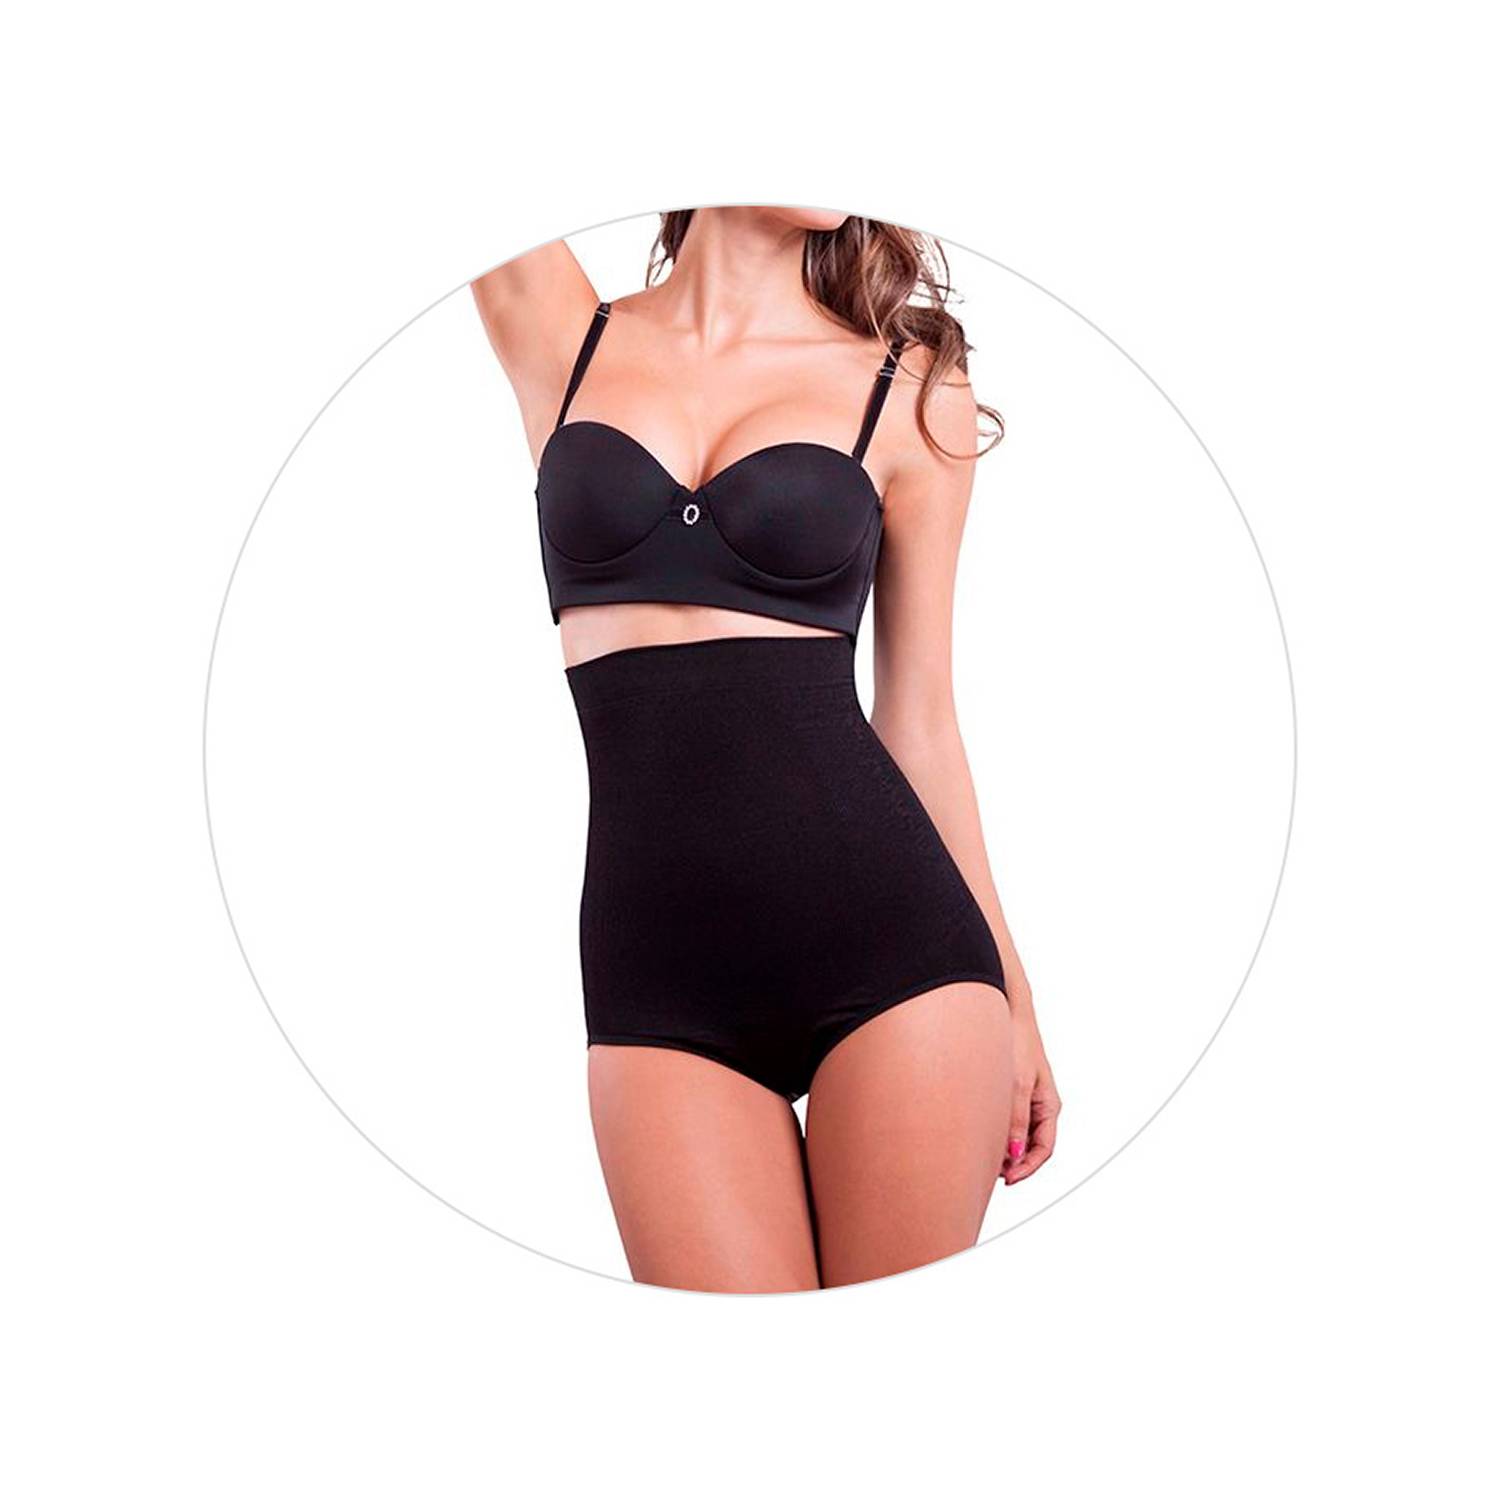 Faja de compresión Velform Cross Mujer Quality Products QUALITY PRODUCTS